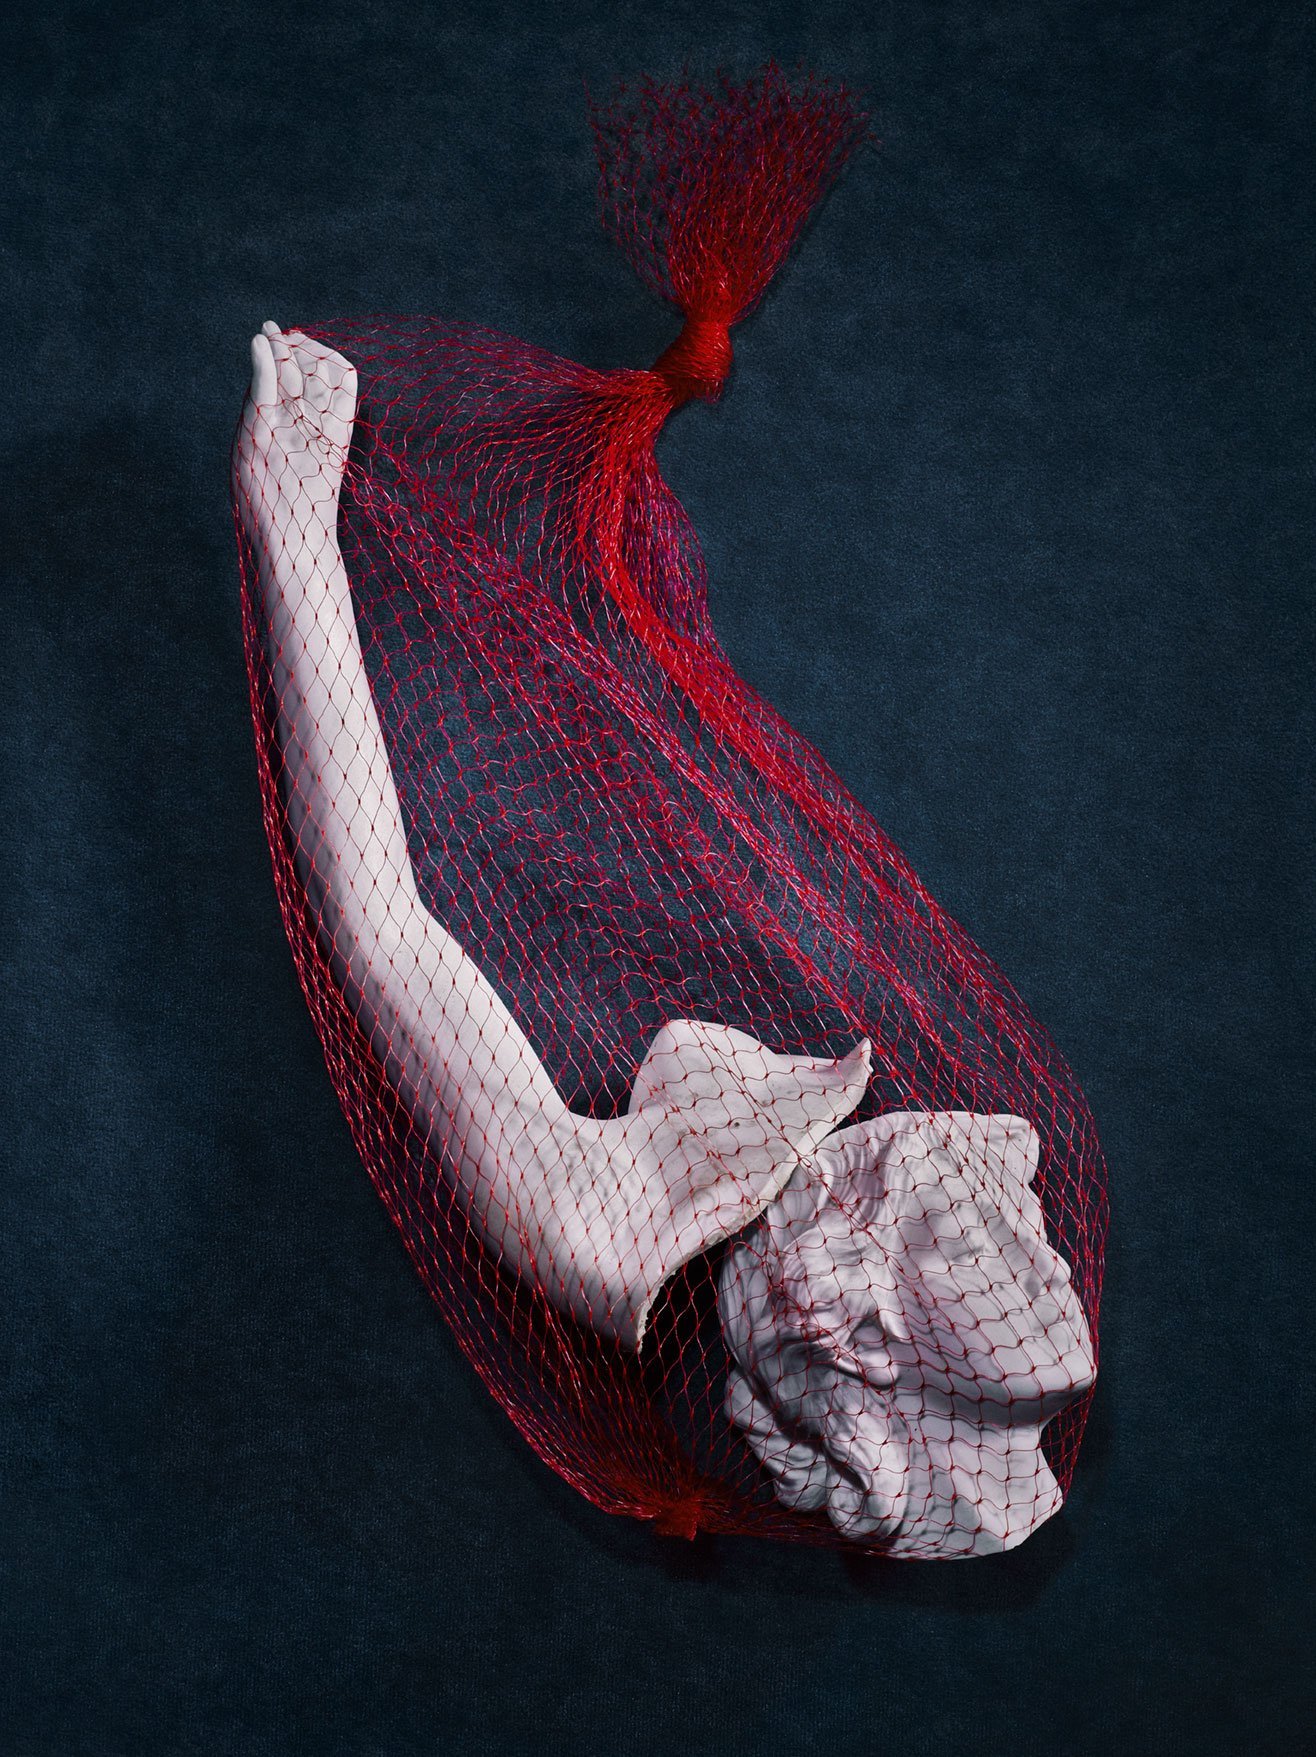 Sculpture in red netting for Romance Journal Issue 02 resistance. Publication design, art direction, print design by RoAndCo.